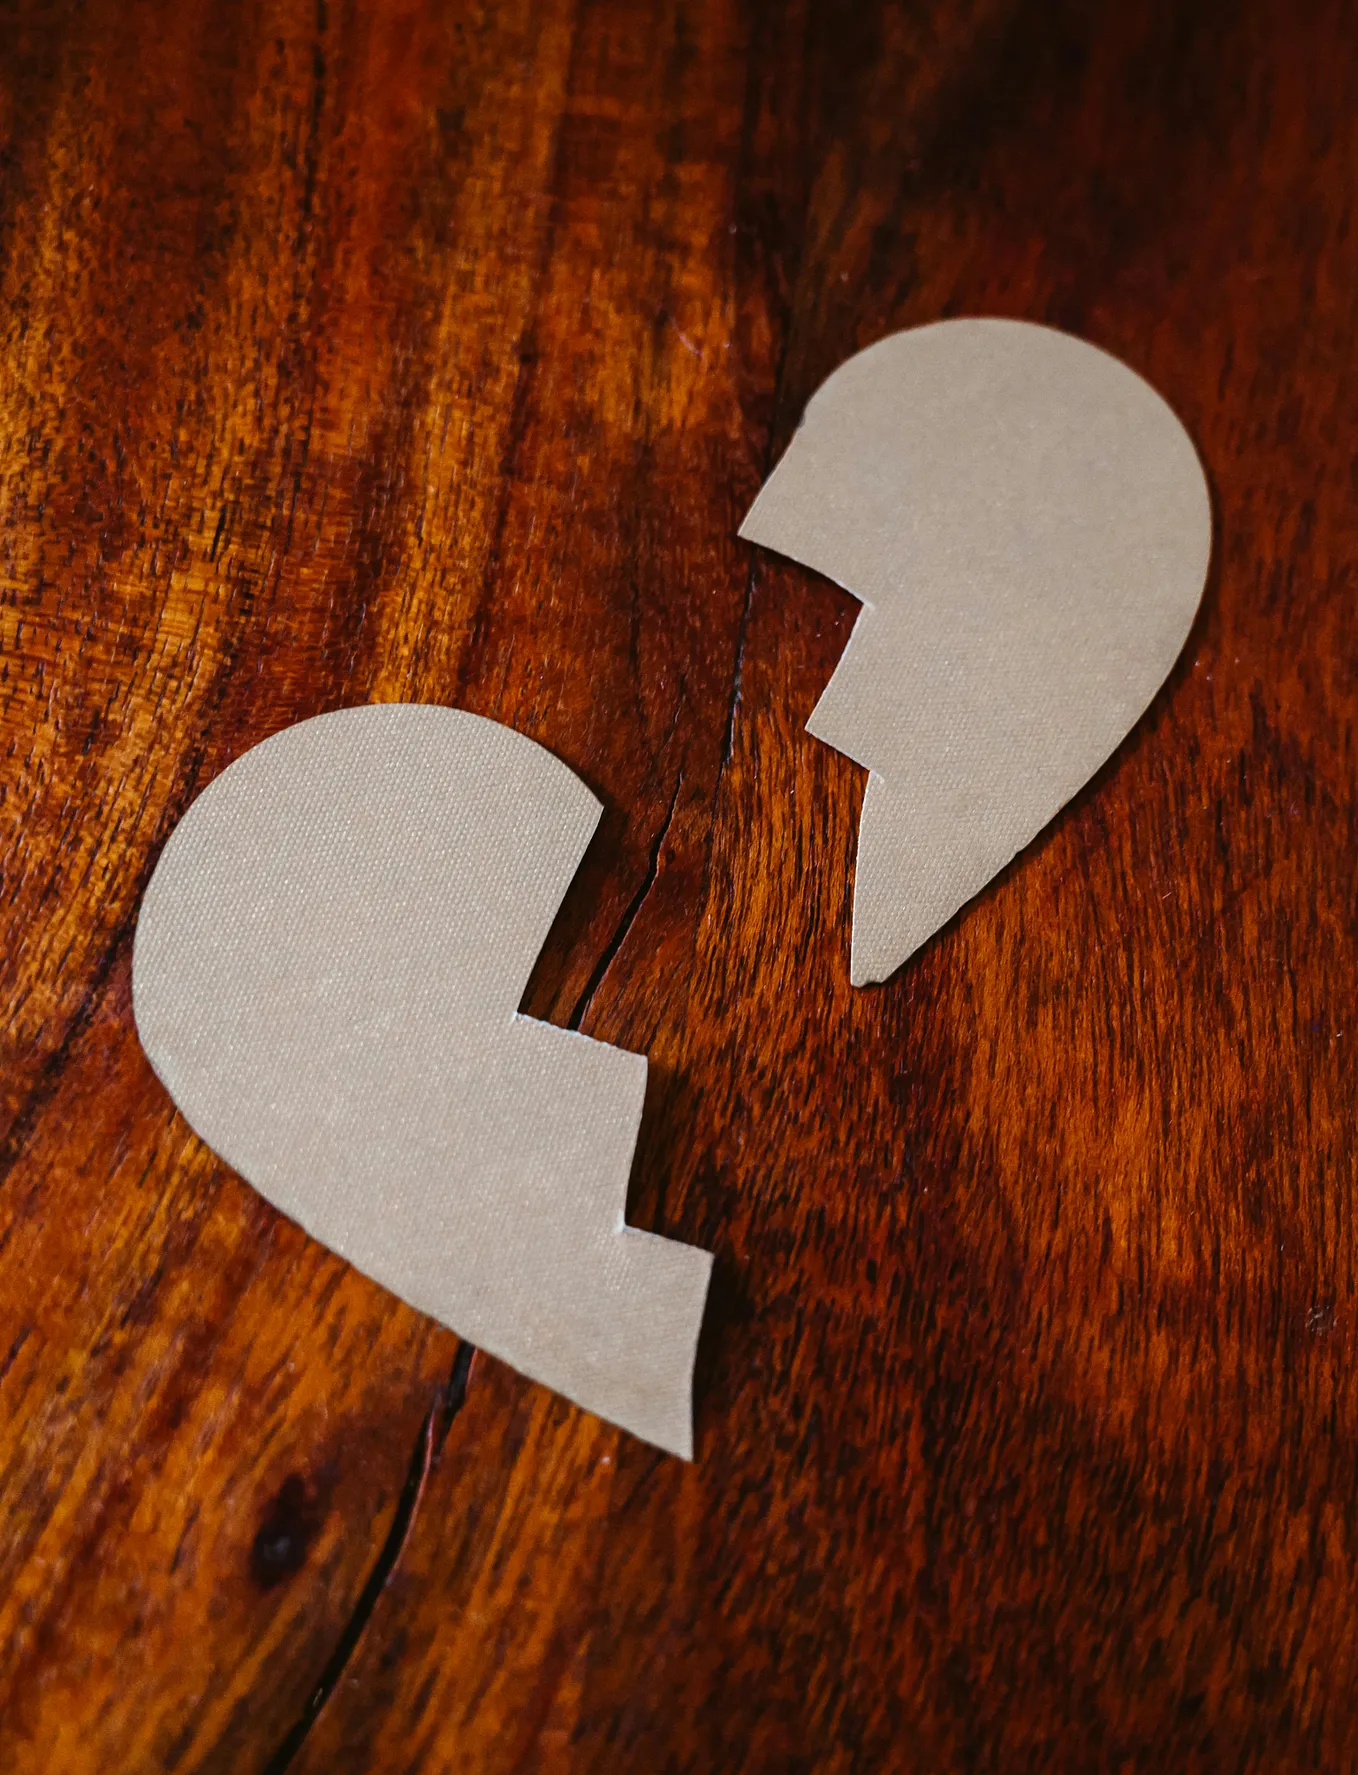 Image of a broken cardboard heart on a wooden surface